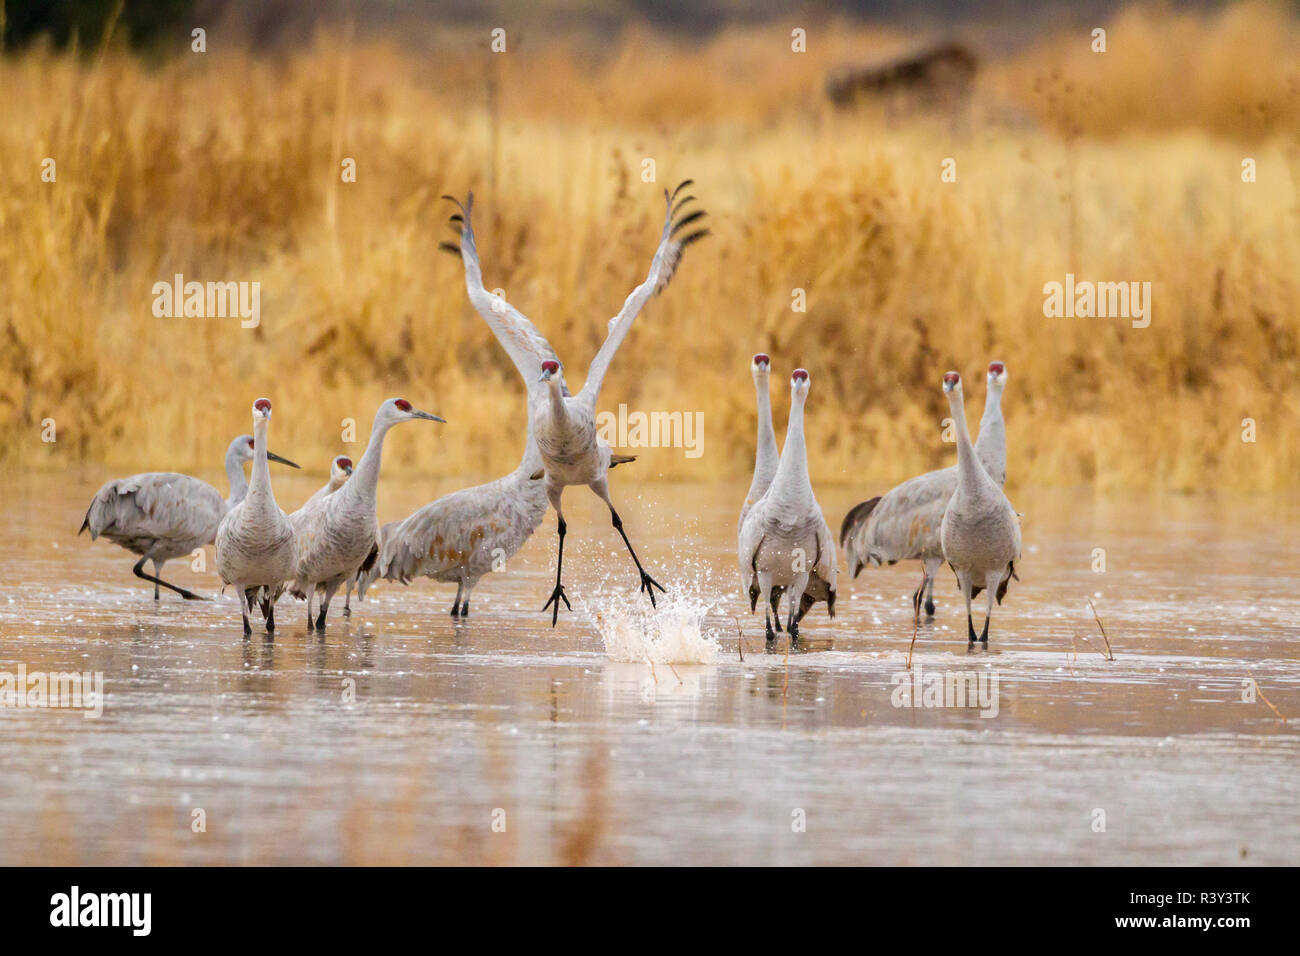 USA, New Mexico, Bosque del Apache National Wildlife Refuge. Sandhill crane takes flight from water. Stock Photo